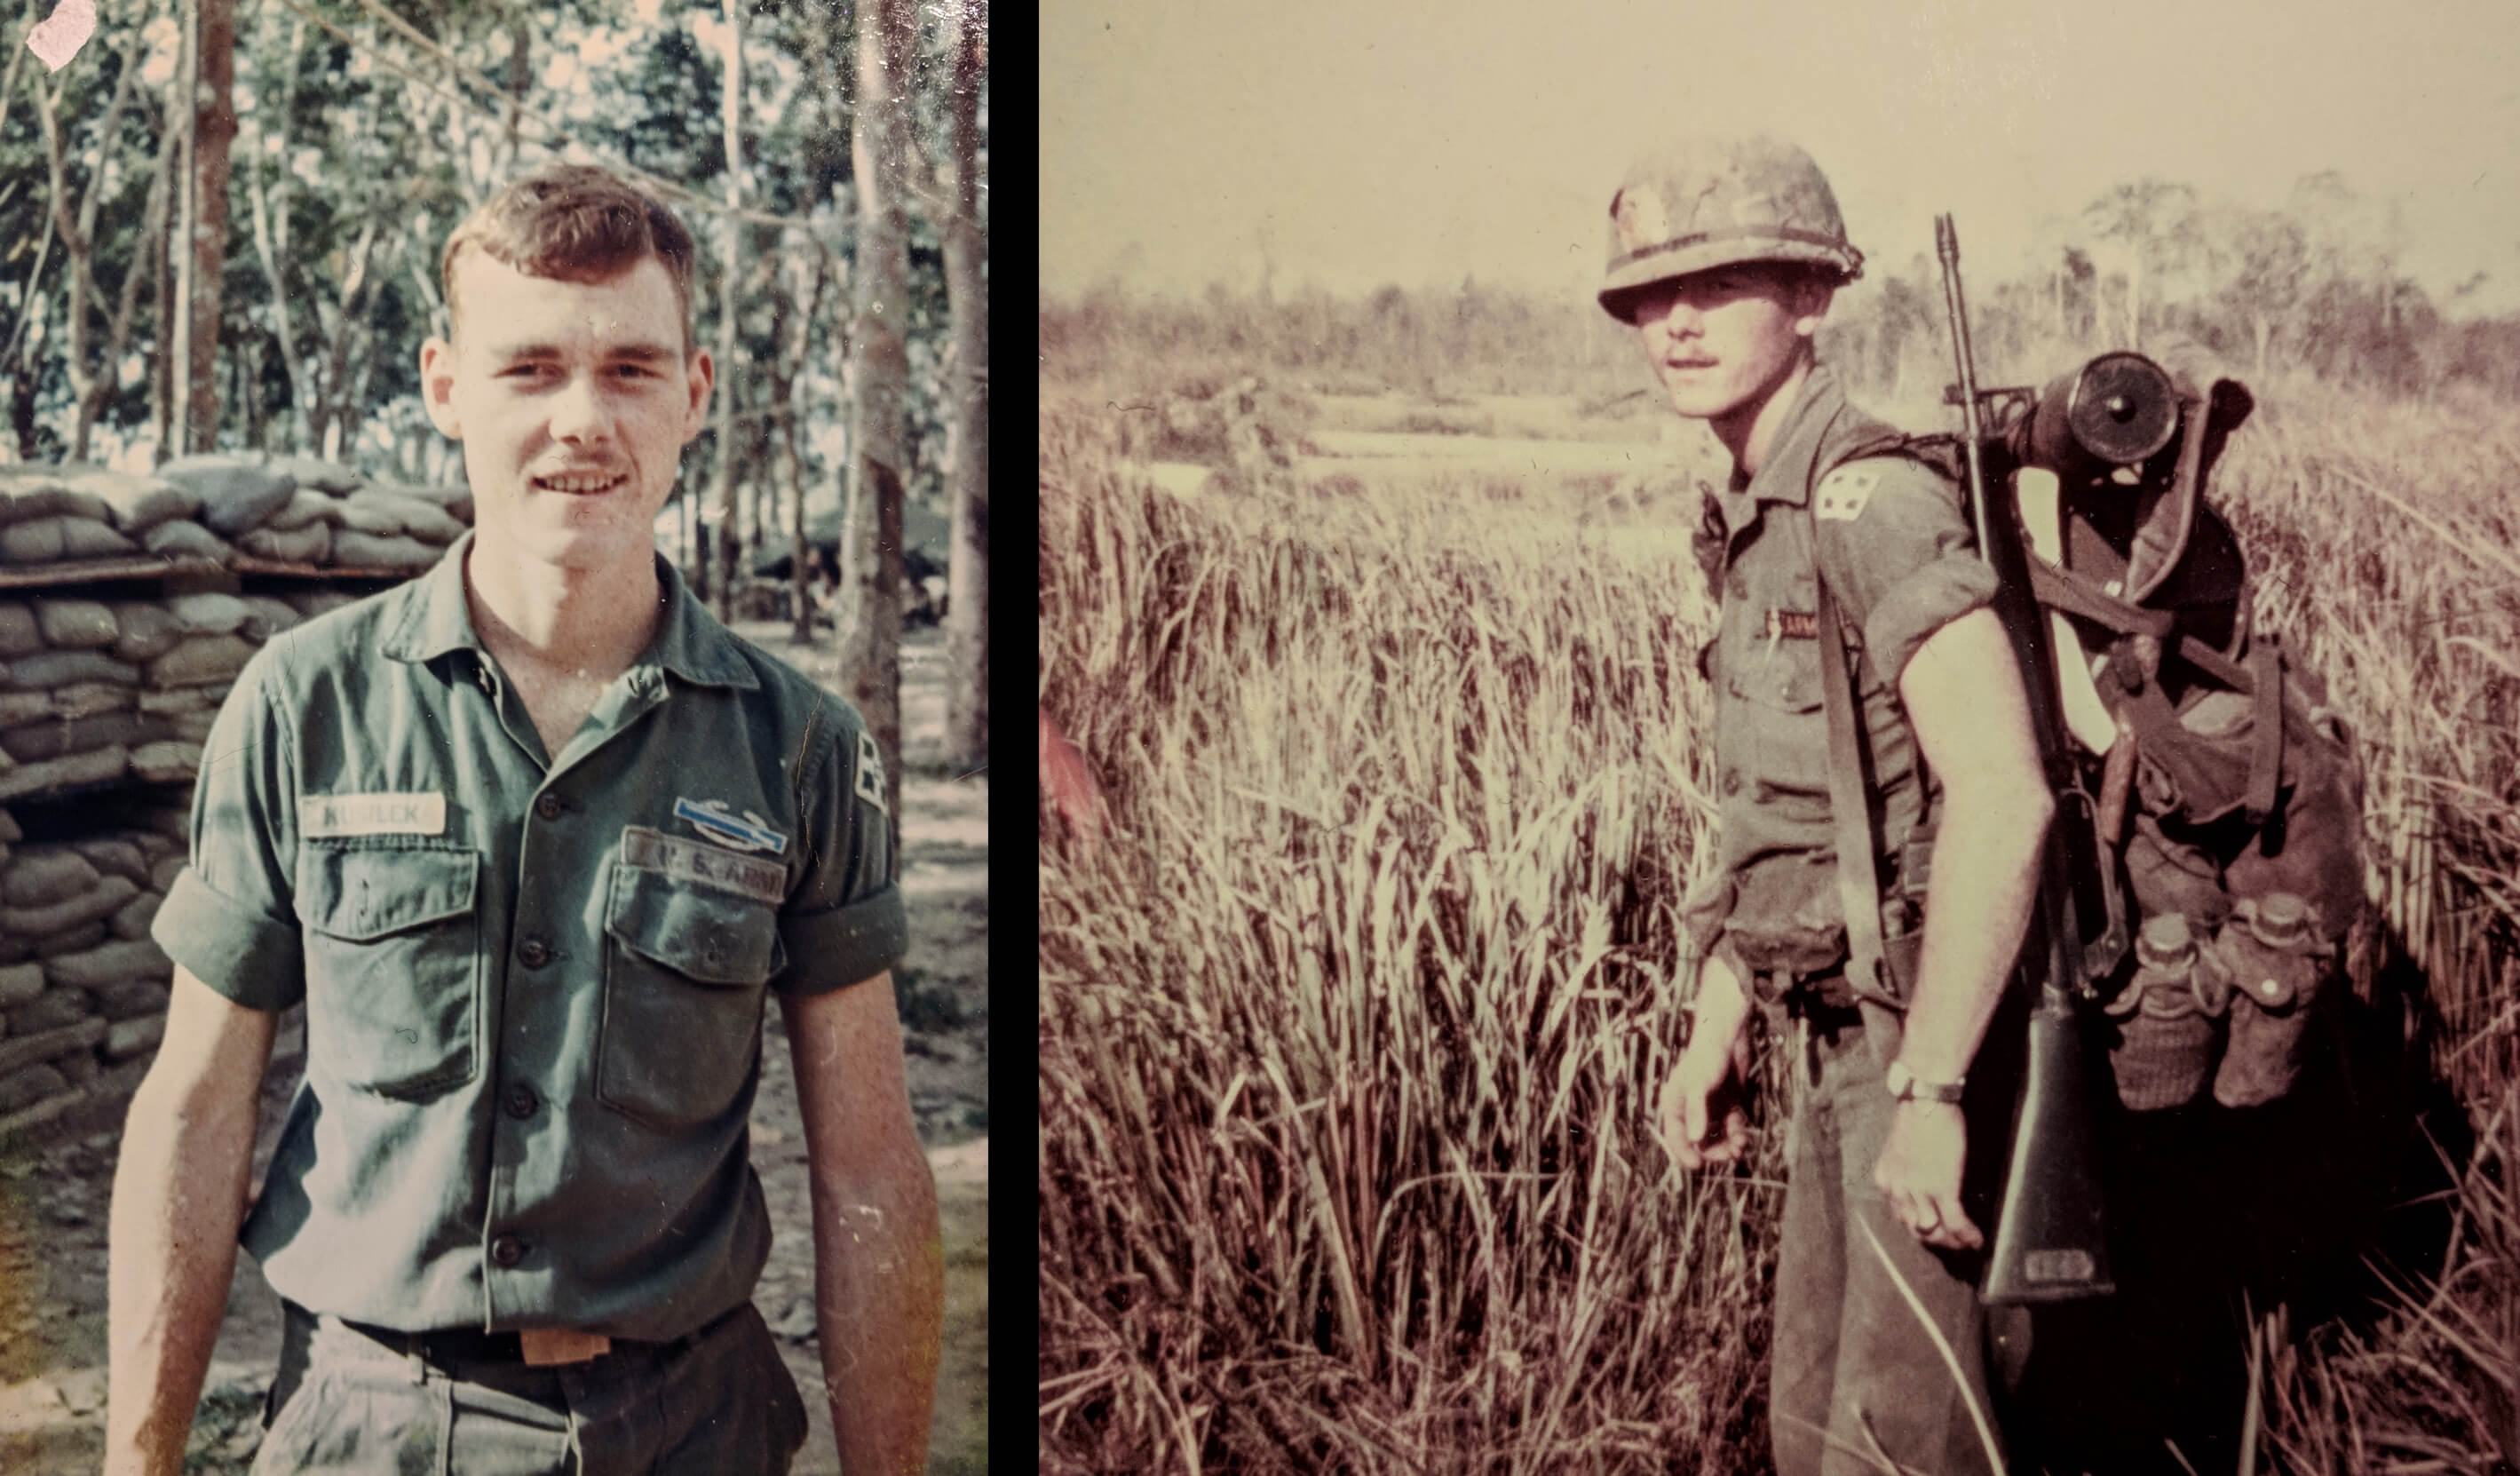 Two photos of a Vietnam War soldier out in the field.